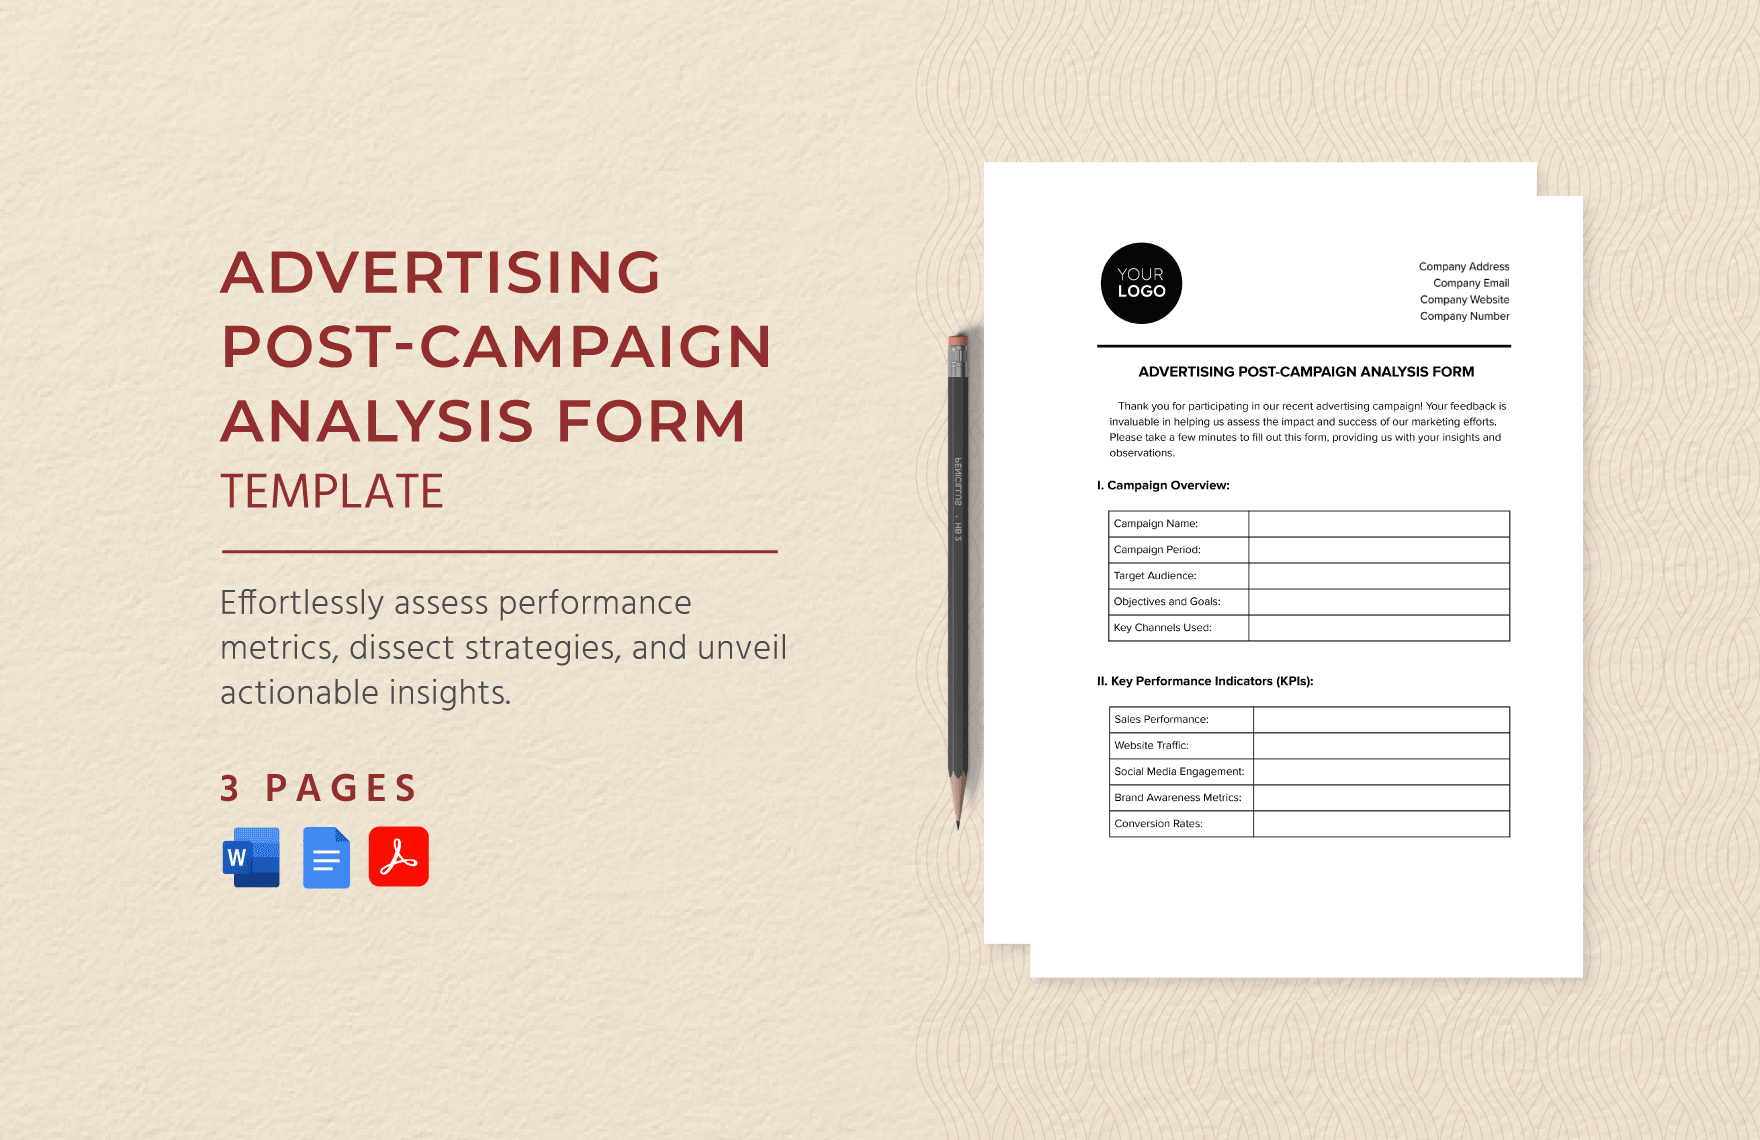 Advertising Post-Campaign Analysis Form Template in Word, Google Docs, PDF